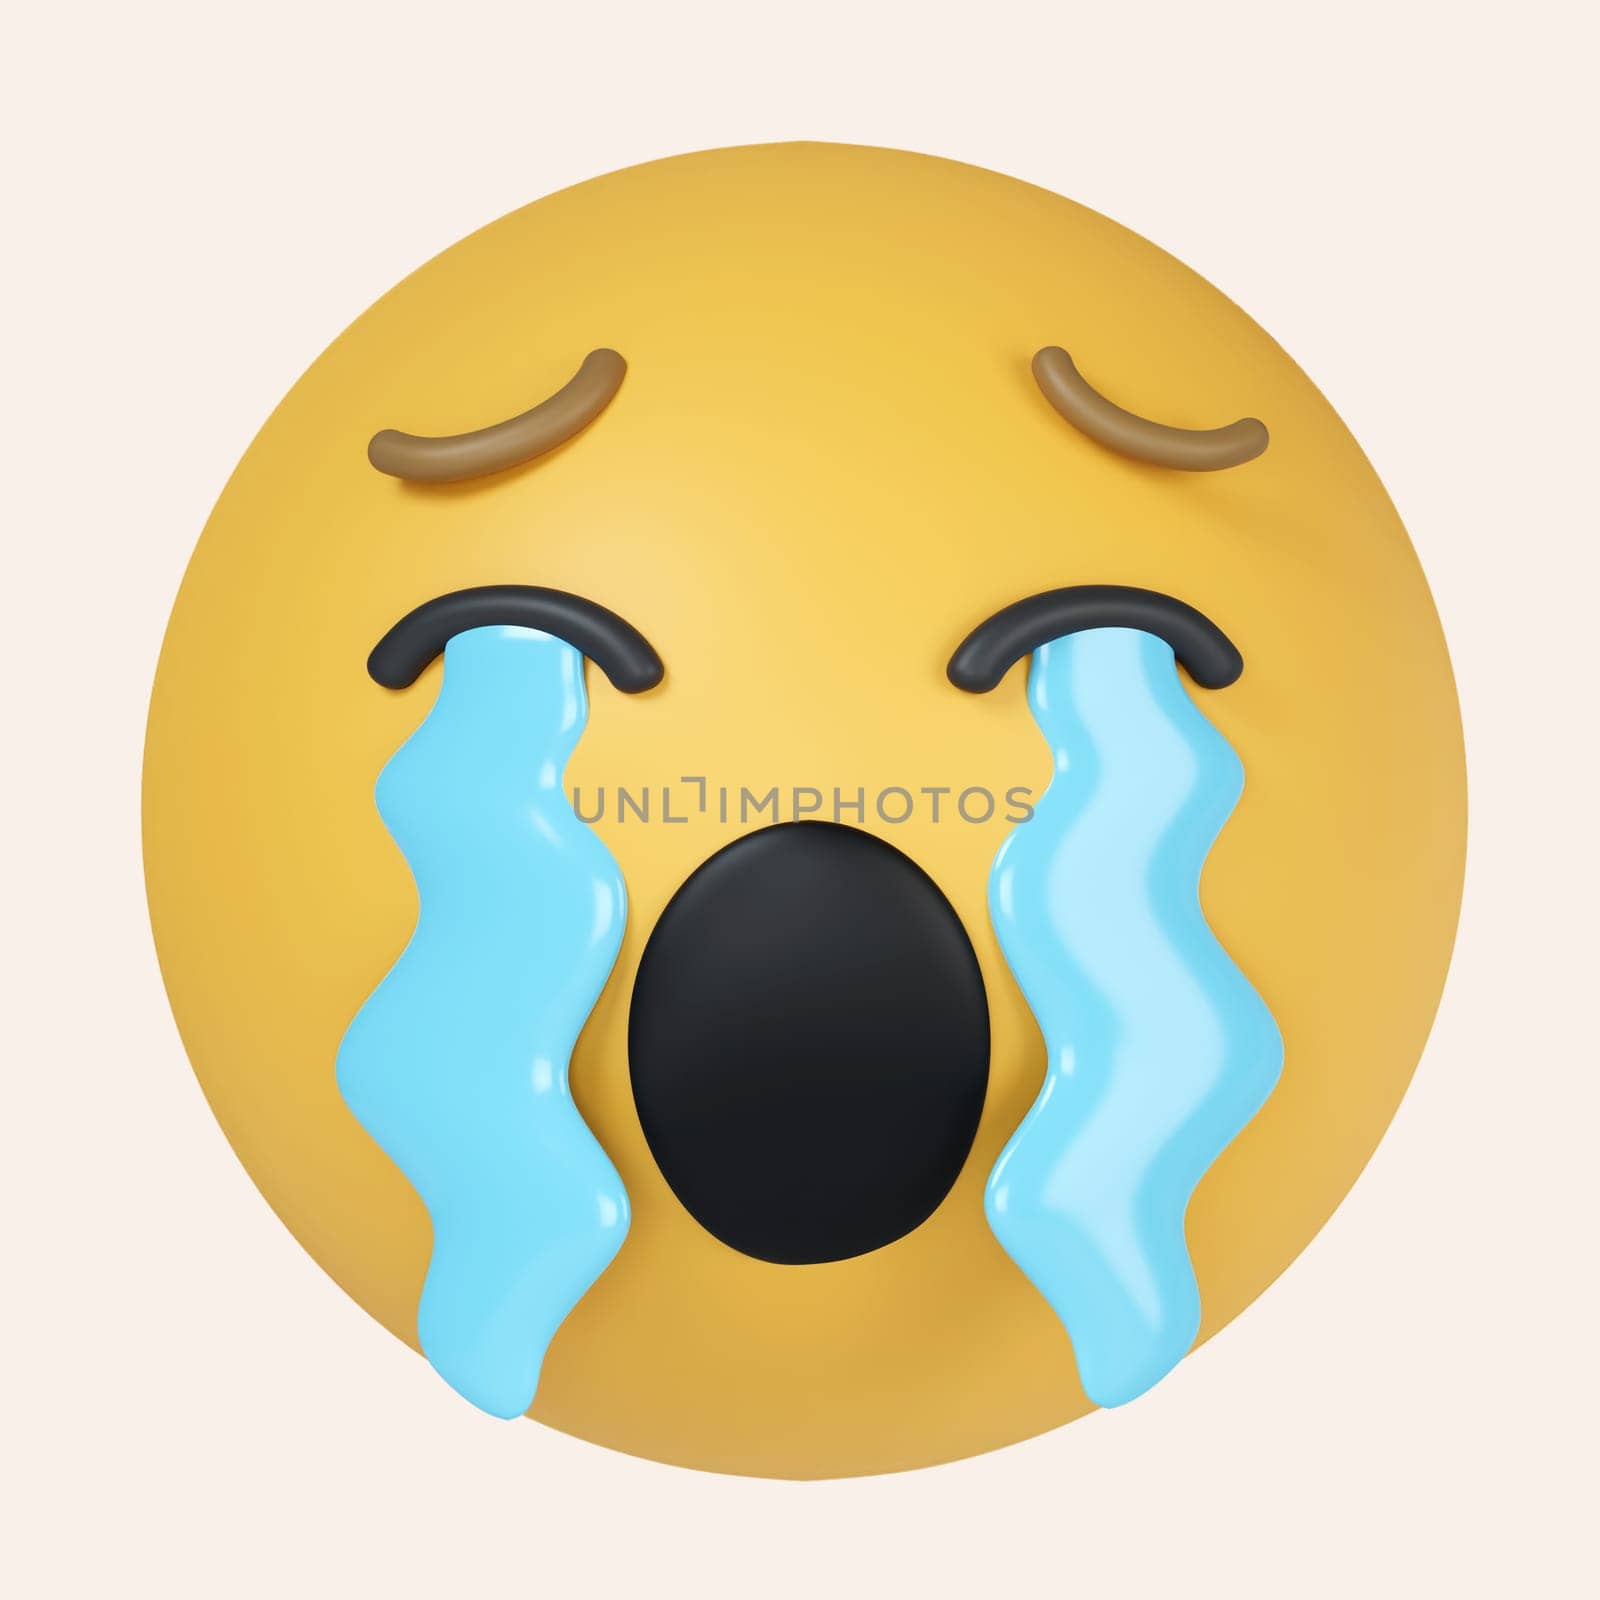 3d Loudly crying face icon. Yellow emoji with his mouth open, tears streaming from his closed eyes. icon isolated on gray background. 3d rendering illustration. Clipping path. by meepiangraphic